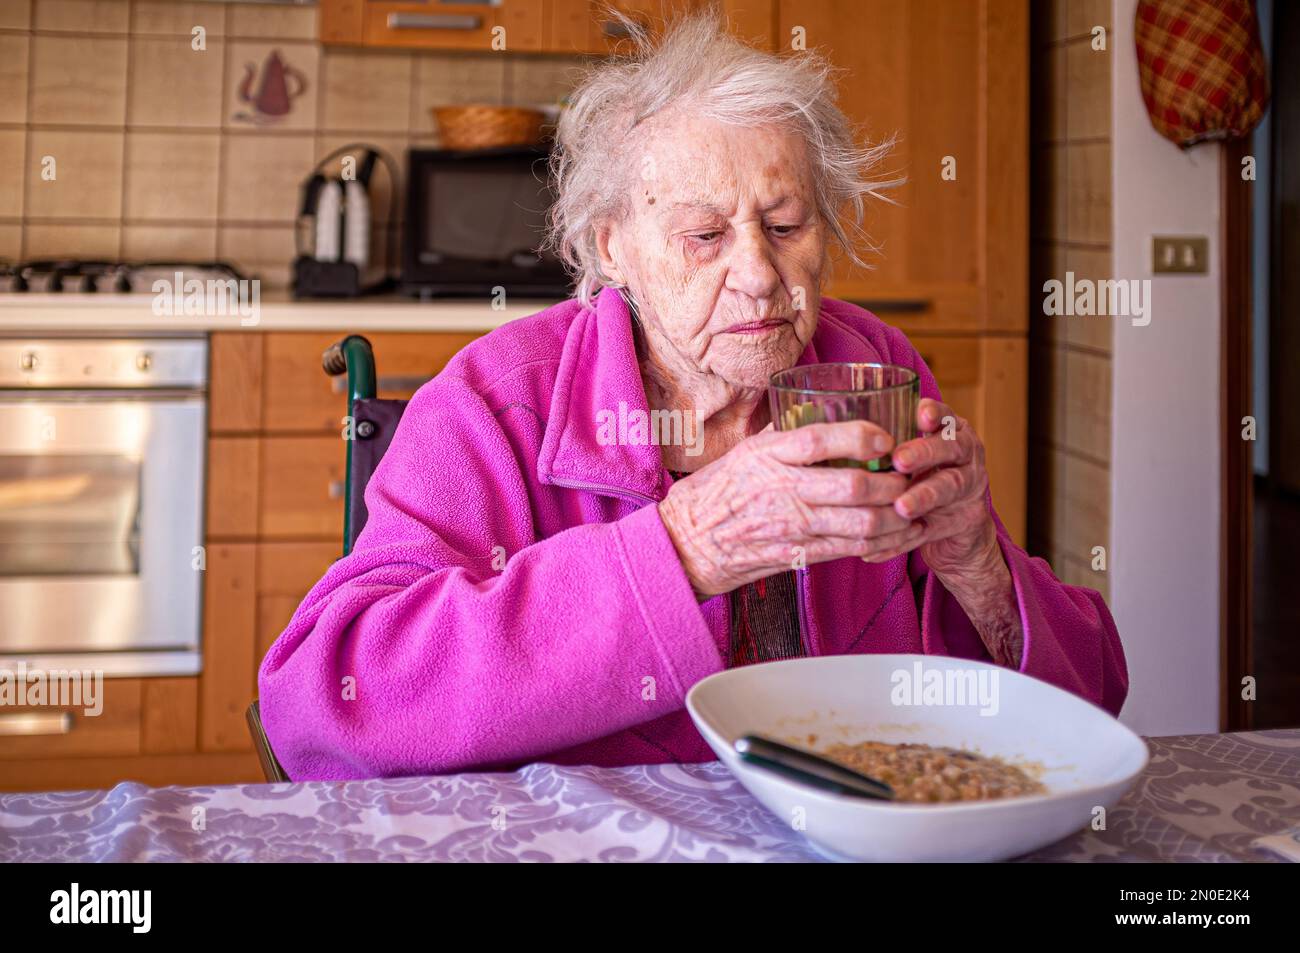 Old lady in a wheelchair with a glass of wine in hand eating alone in her kitchen Stock Photo